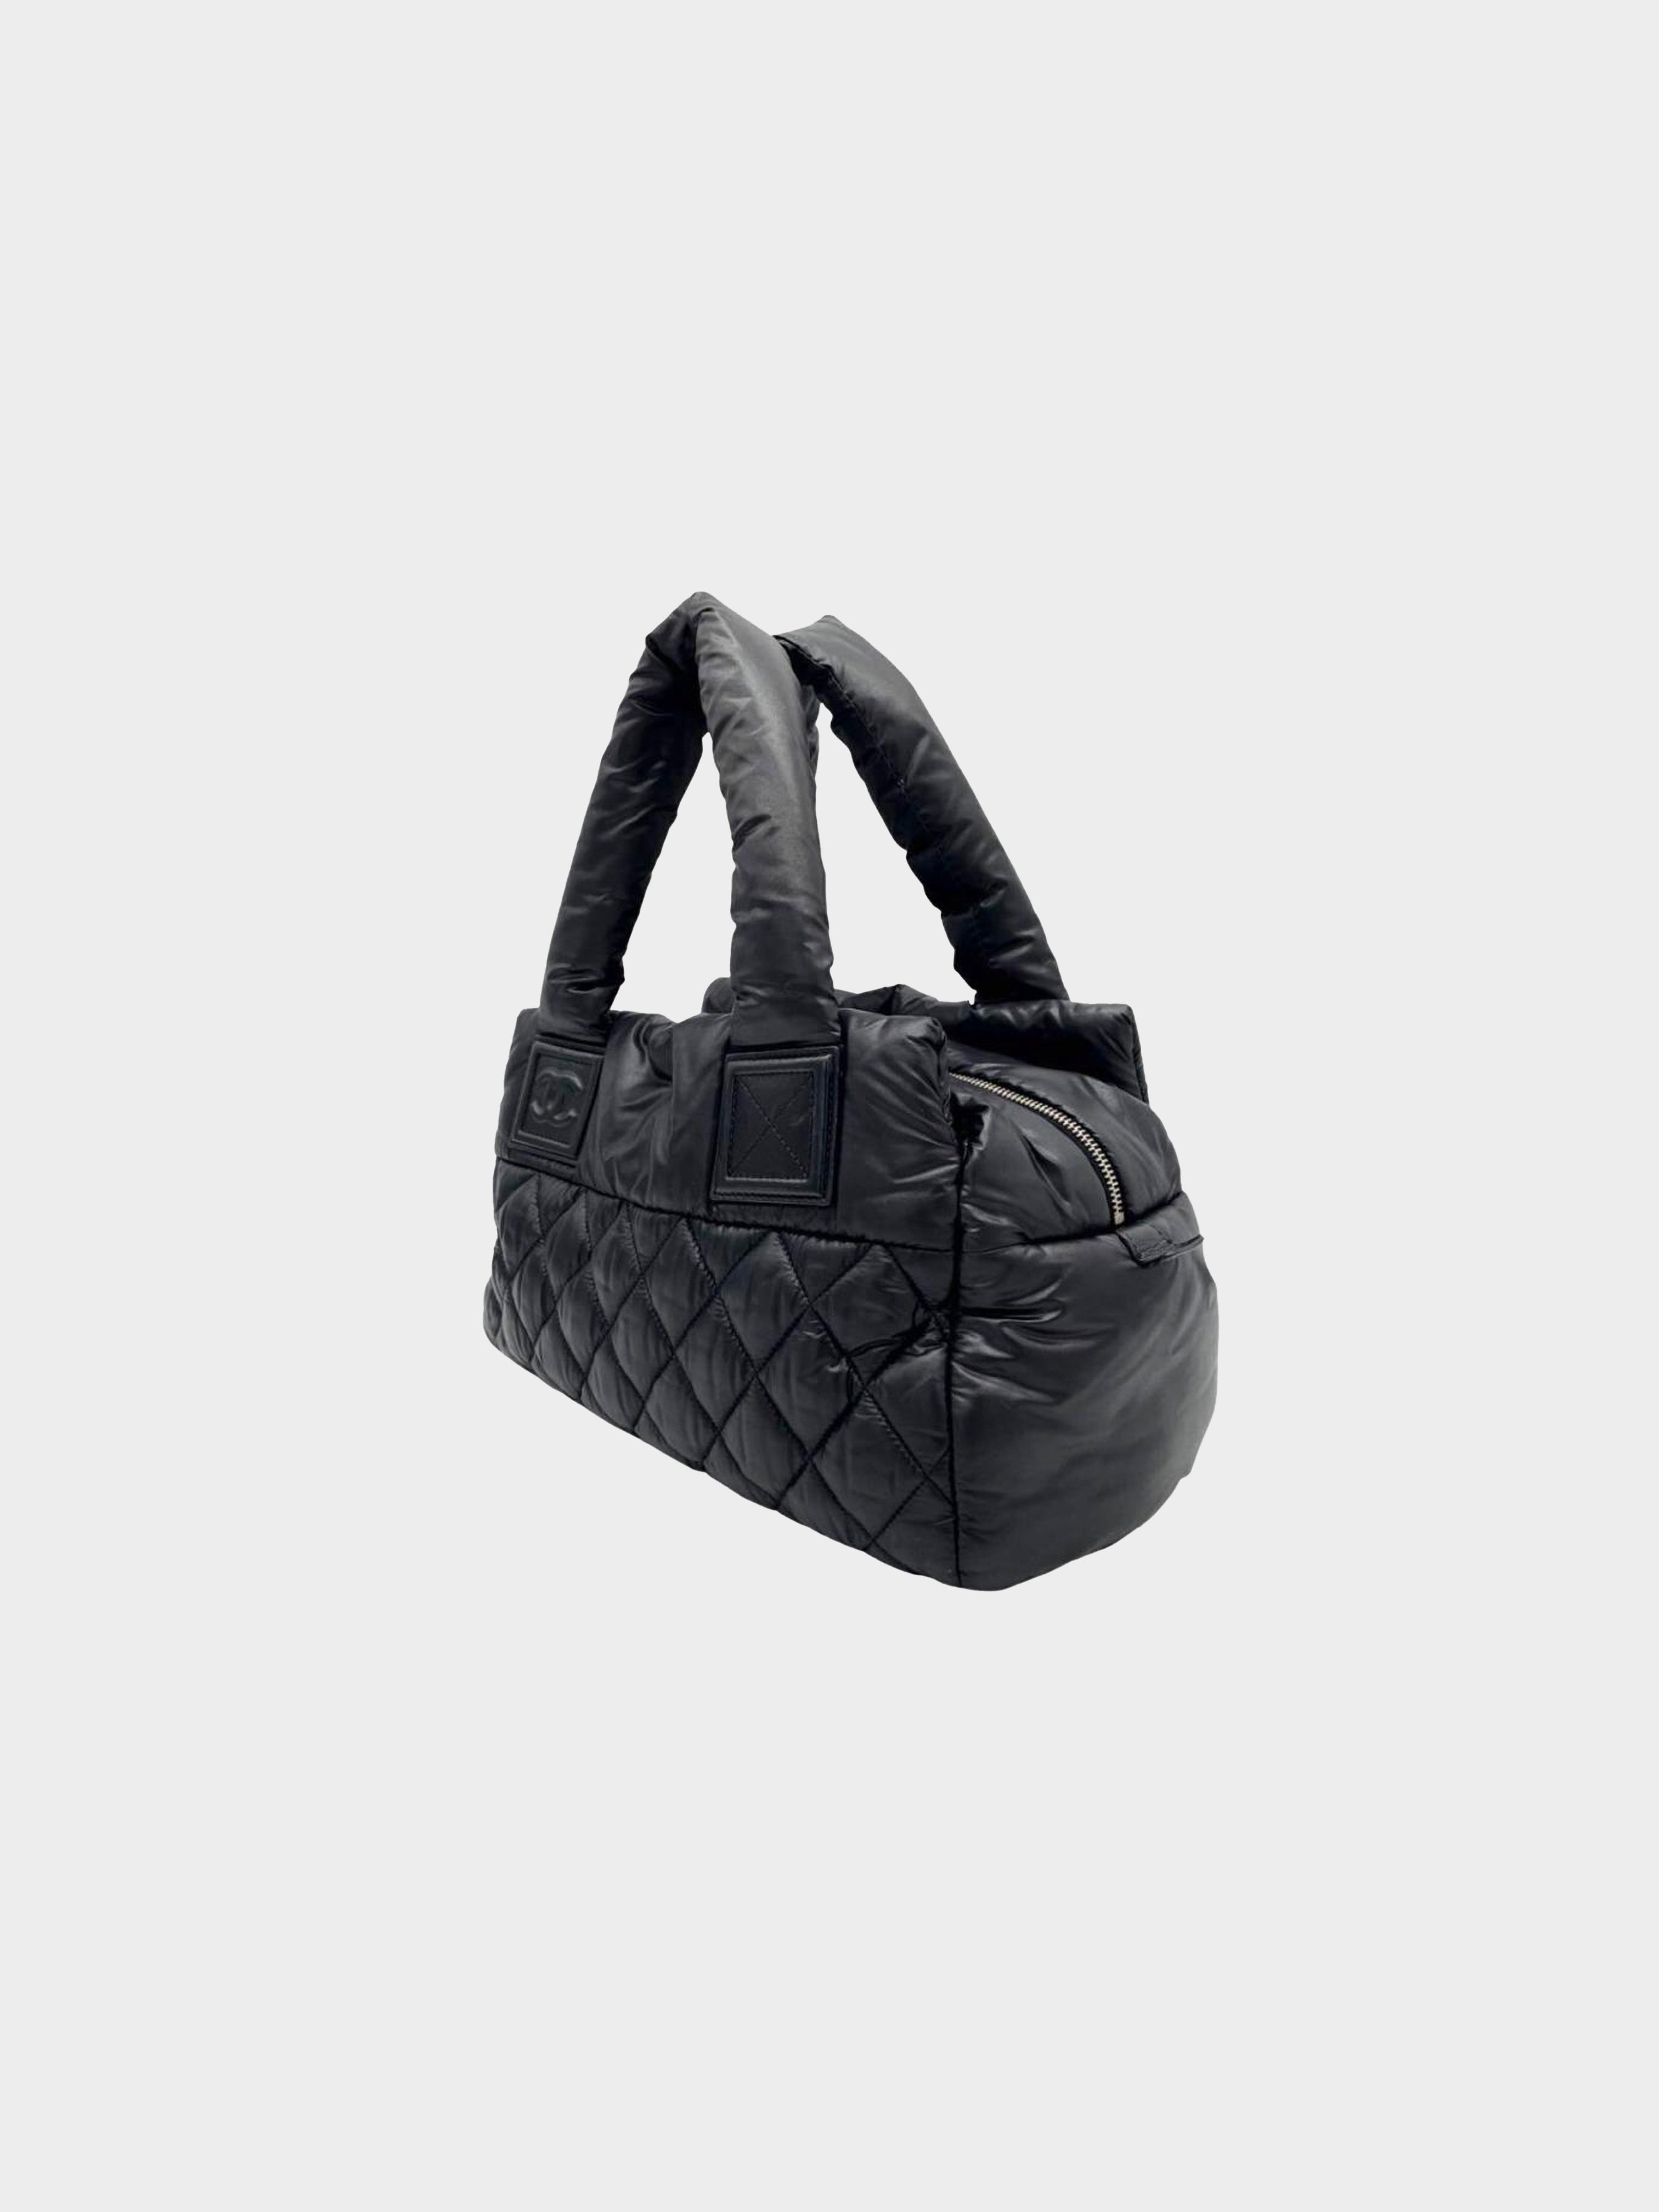 Chanel Cocoon Shoulder Bags for Women